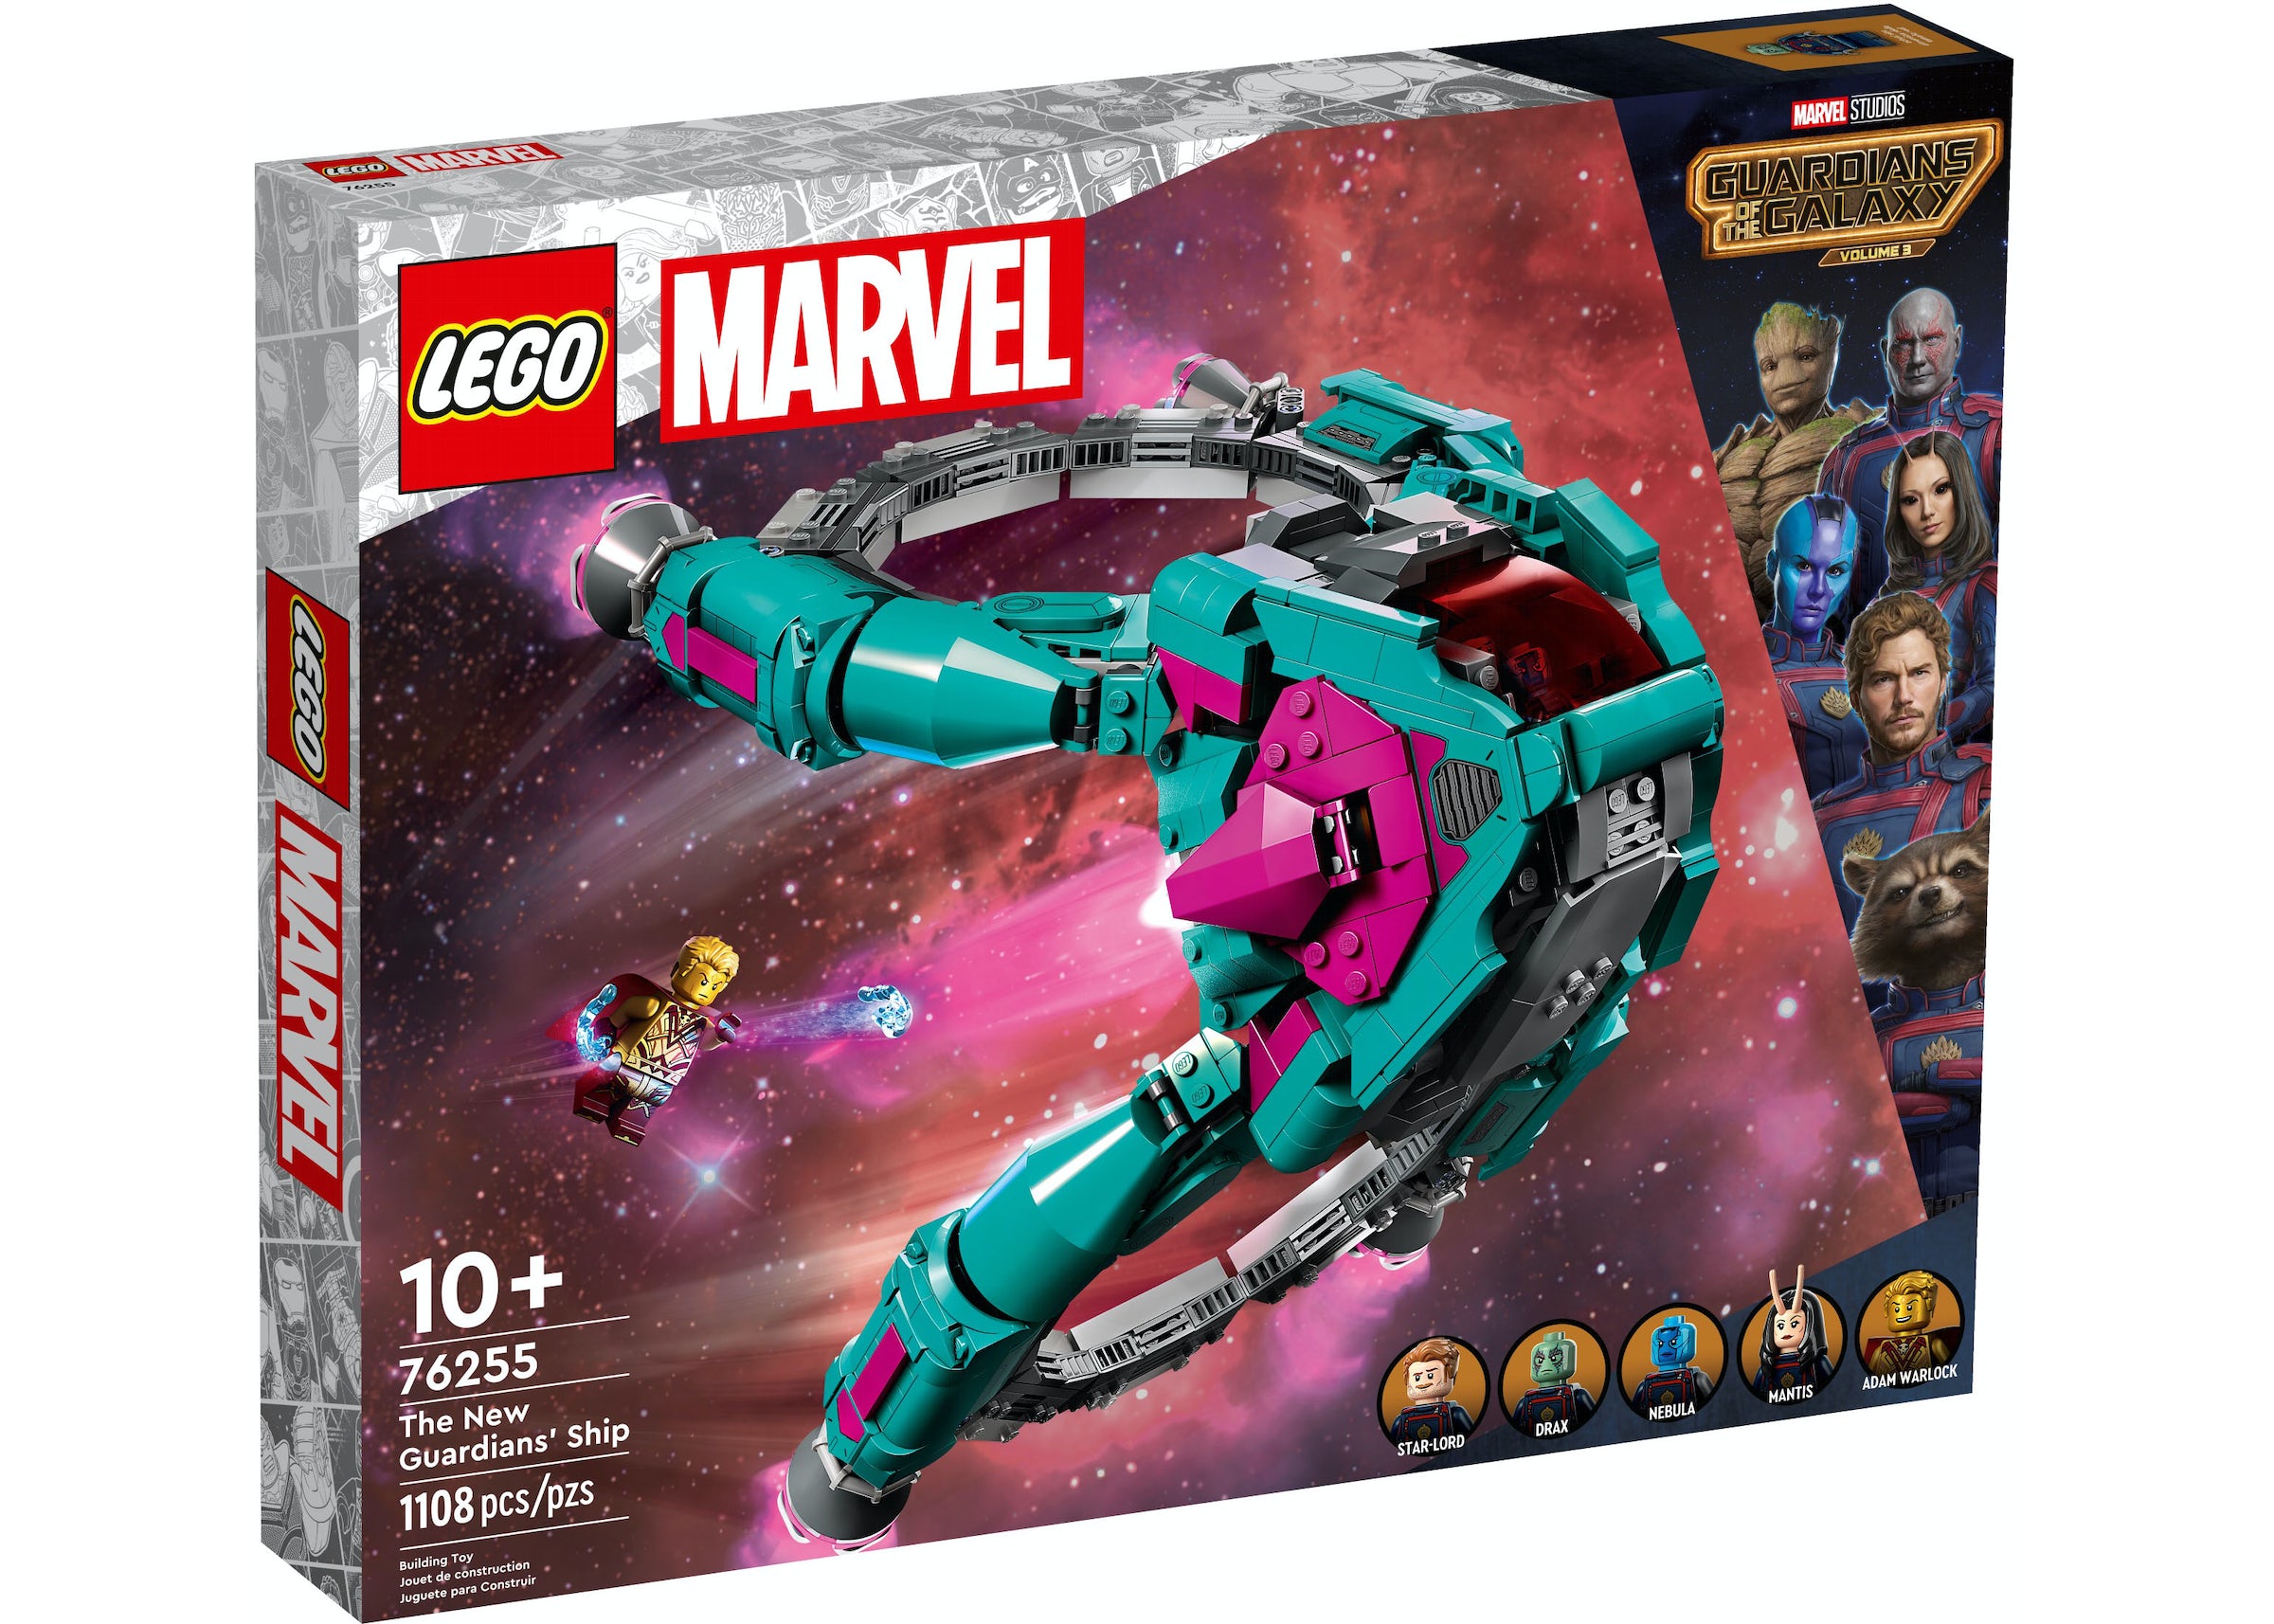 LEGO Marvel Guardians the Galaxy Volume The New Guardians' Ship Set - US